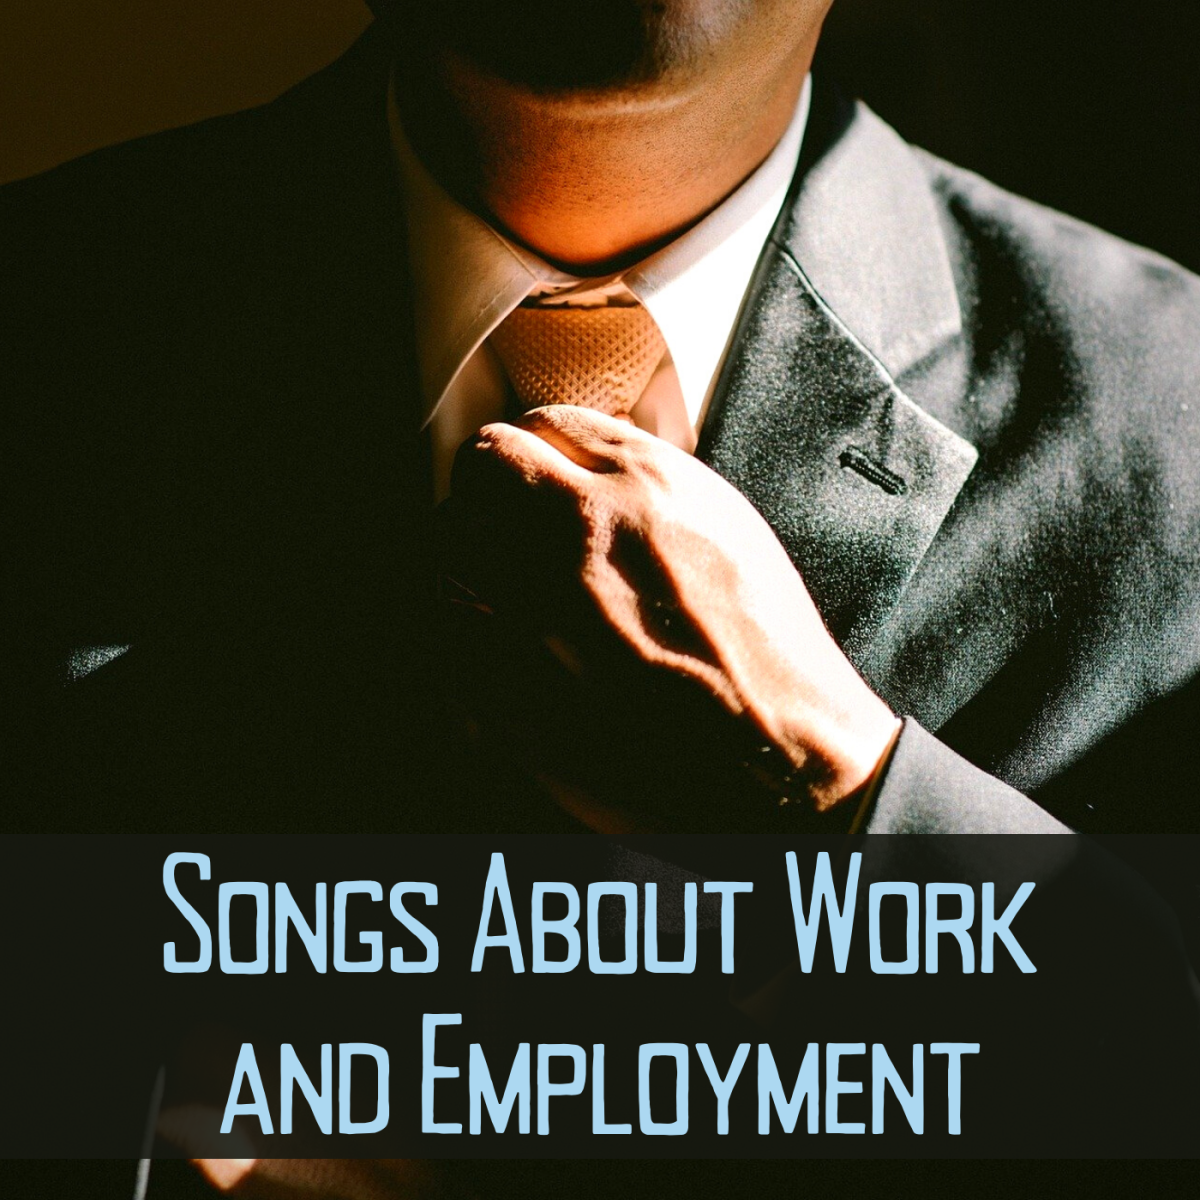 Whether you're blue collar, white collar, or self-employed, celebrate the contribution you make to the labor force with a playlist of pop, rock, and country songs about work, jobs, and employment. Workers like you help make this country strong.